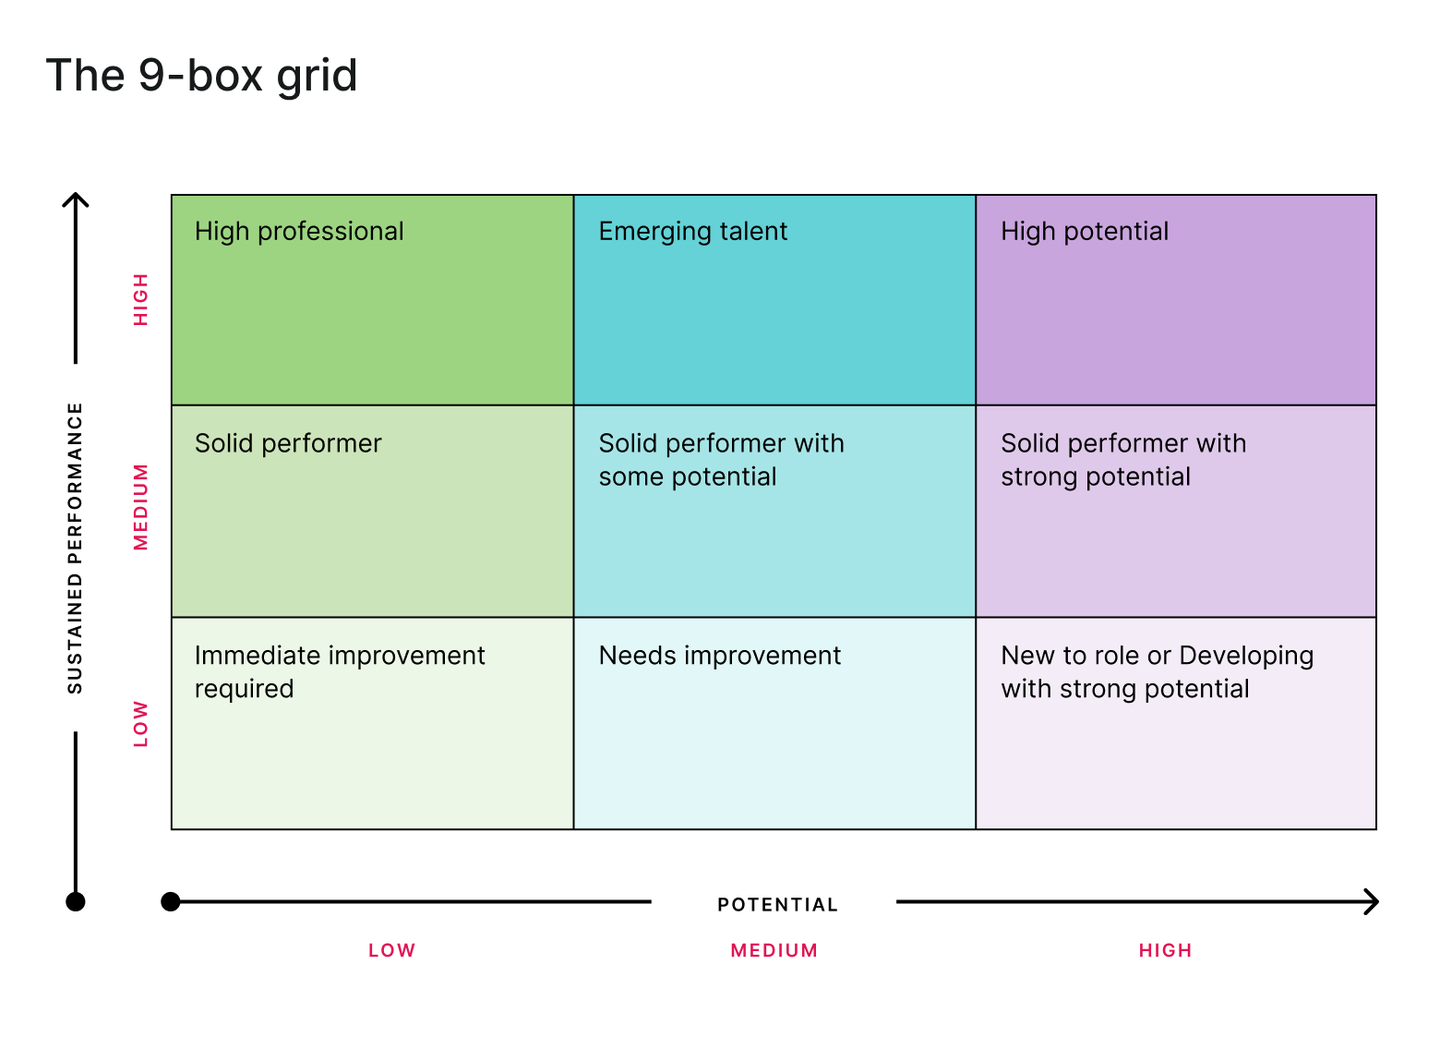 Pros and cons of using a 9box grid for succession planning Culture Amp